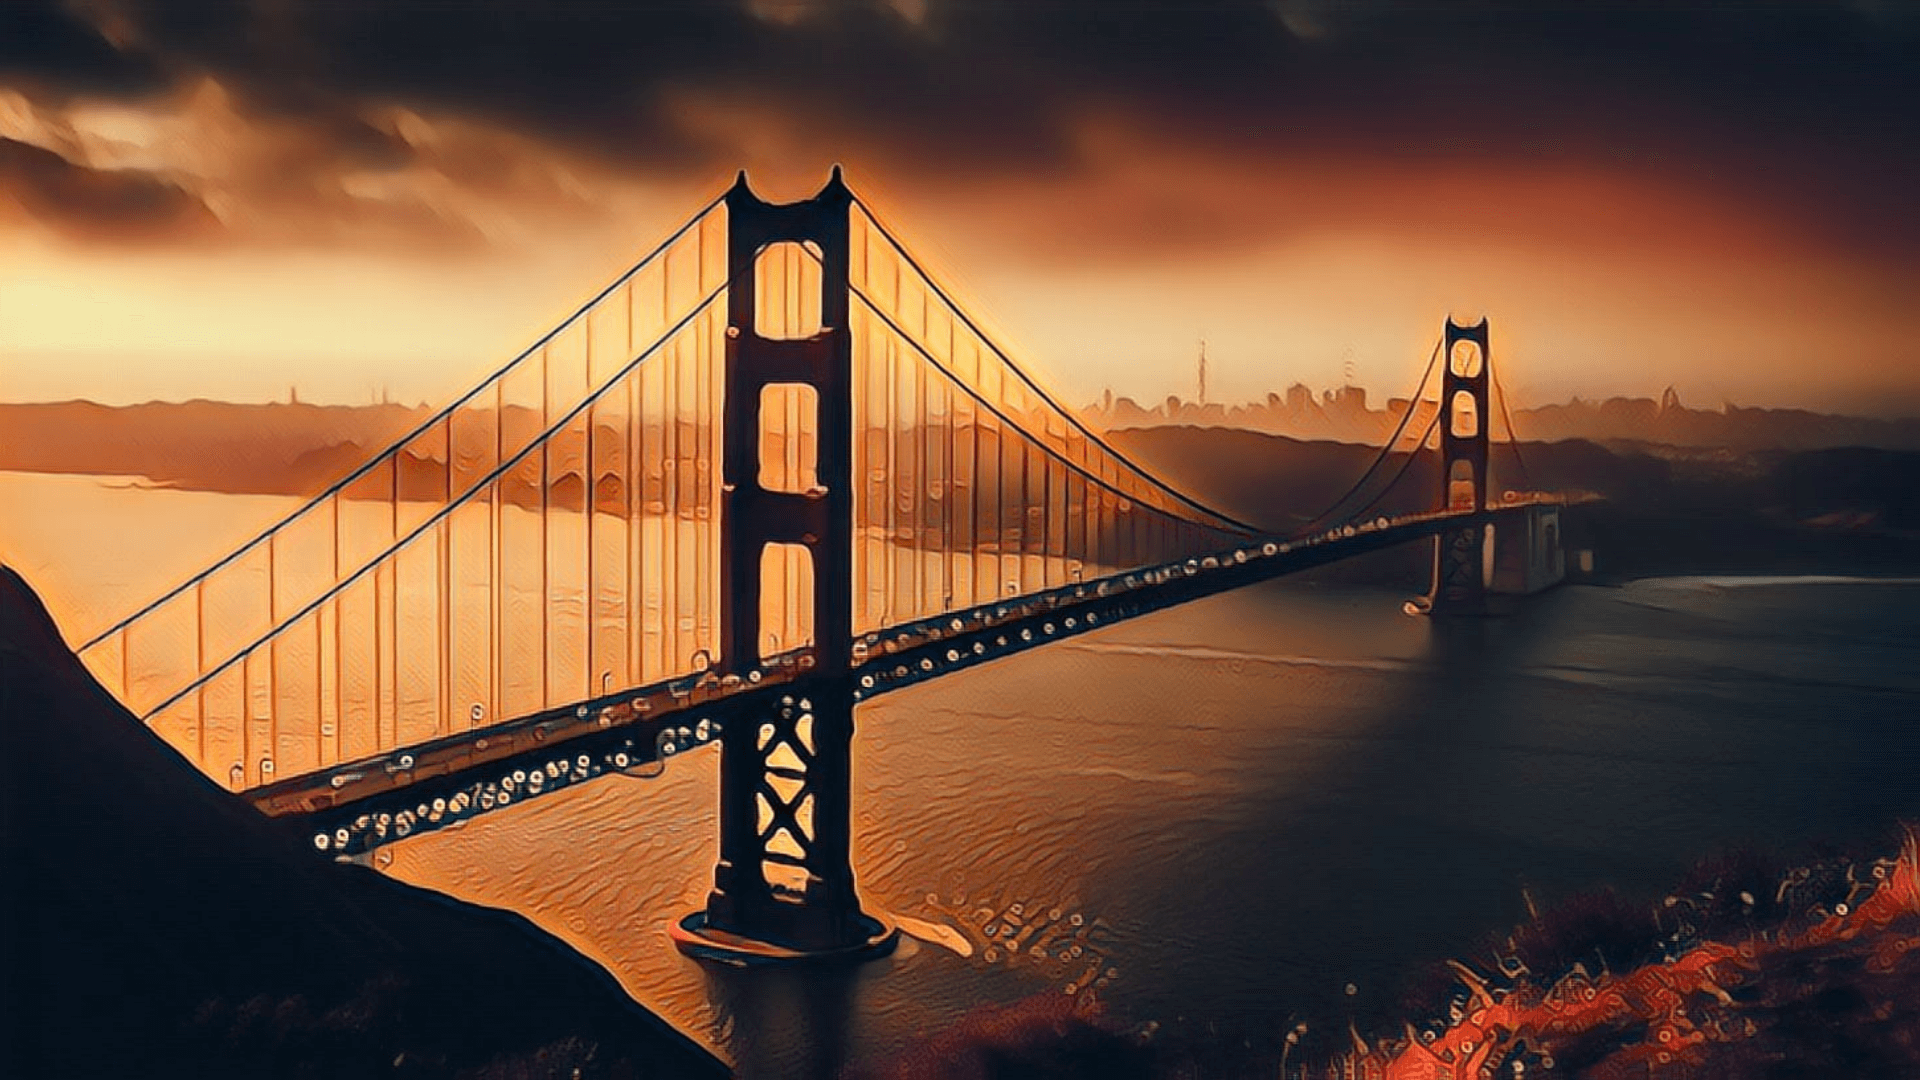 Ultimate Guide to California Real Estate Investing - San Francisco Golden Gate Bridge, brown photo-filtered dusk ariel photo, San Francisco Bay water, grass, city in distance